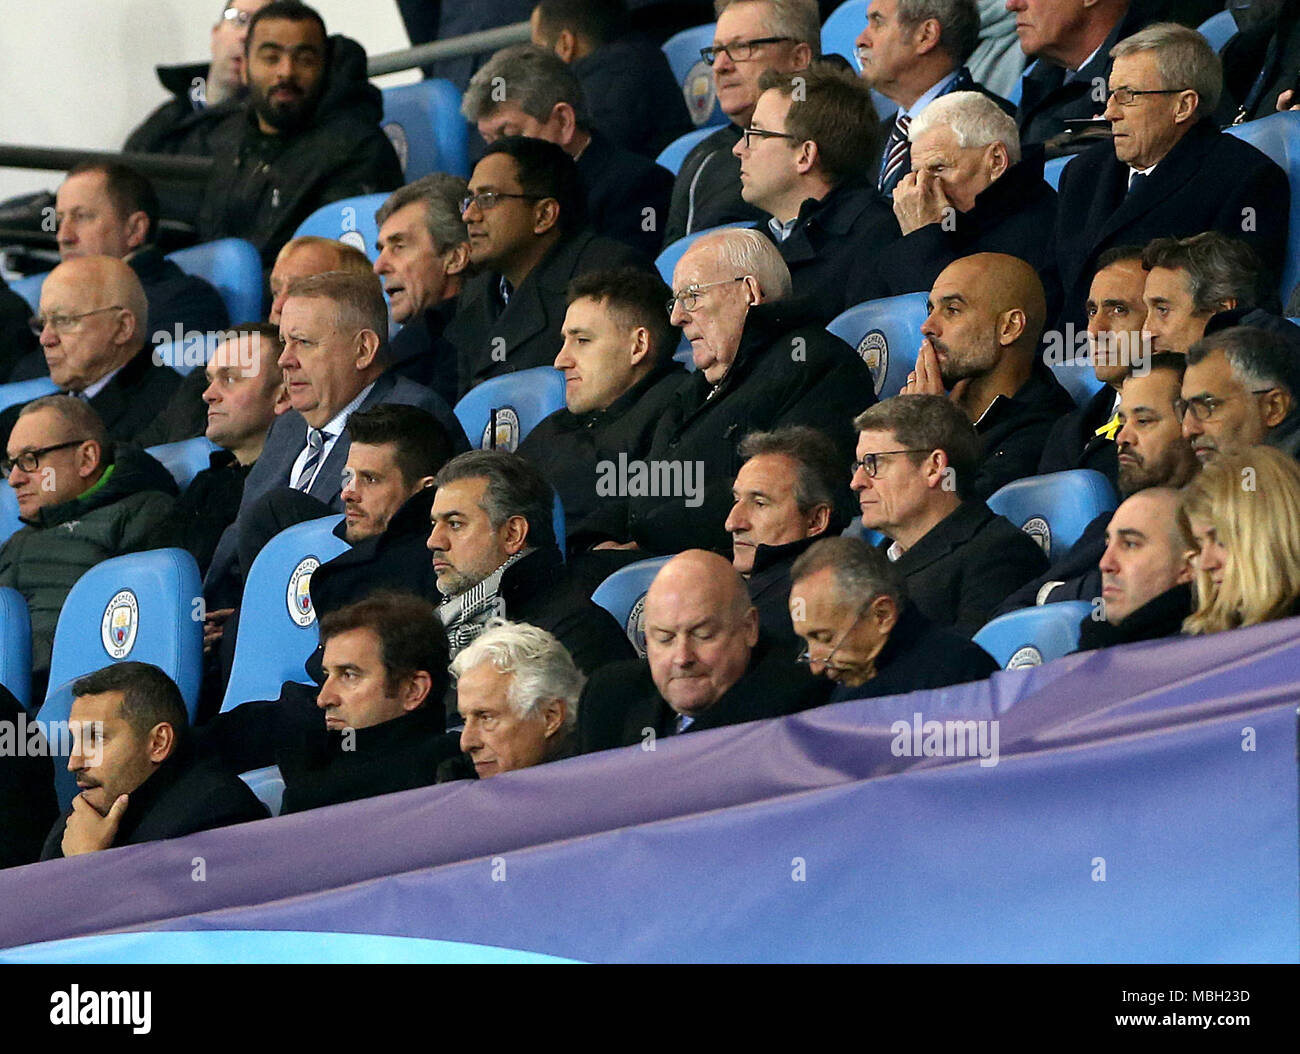 Manchester City manager Pep Guardiola (centre third right), chairman Khaldoon Al Mubarak (bottom left) and CEO Ferran Soriano (second bottom left) in the stands during the UEFA Champions League, Quarter Final at the Etihad Stadium, Manchester. Stock Photo